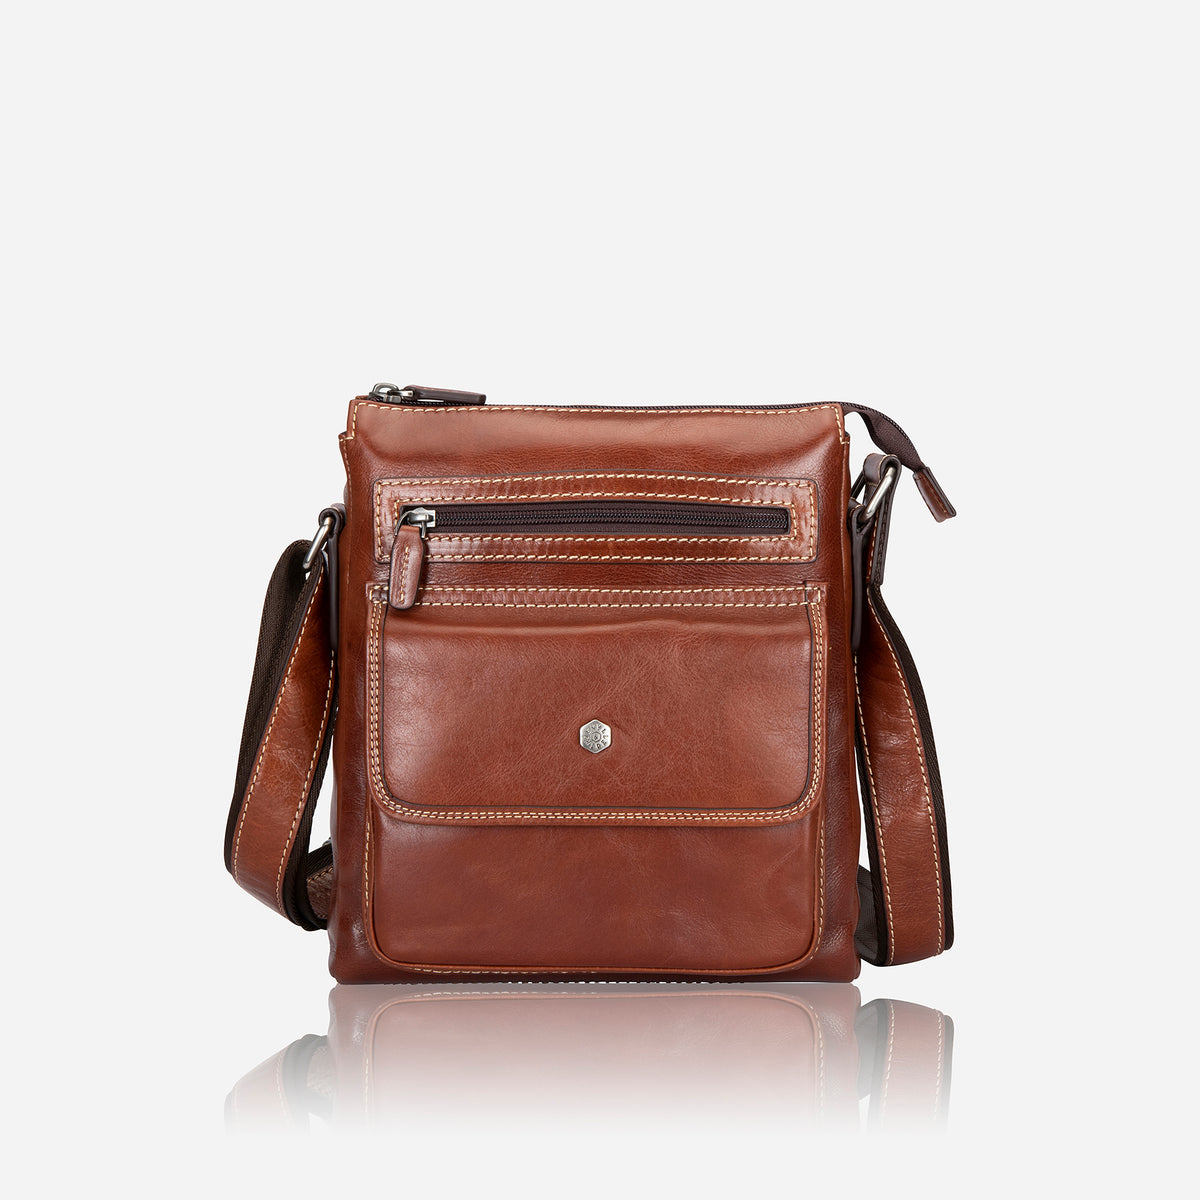 Jekyll and Hide Oxford Leather Crossbody Organiser Bag - Tobacco